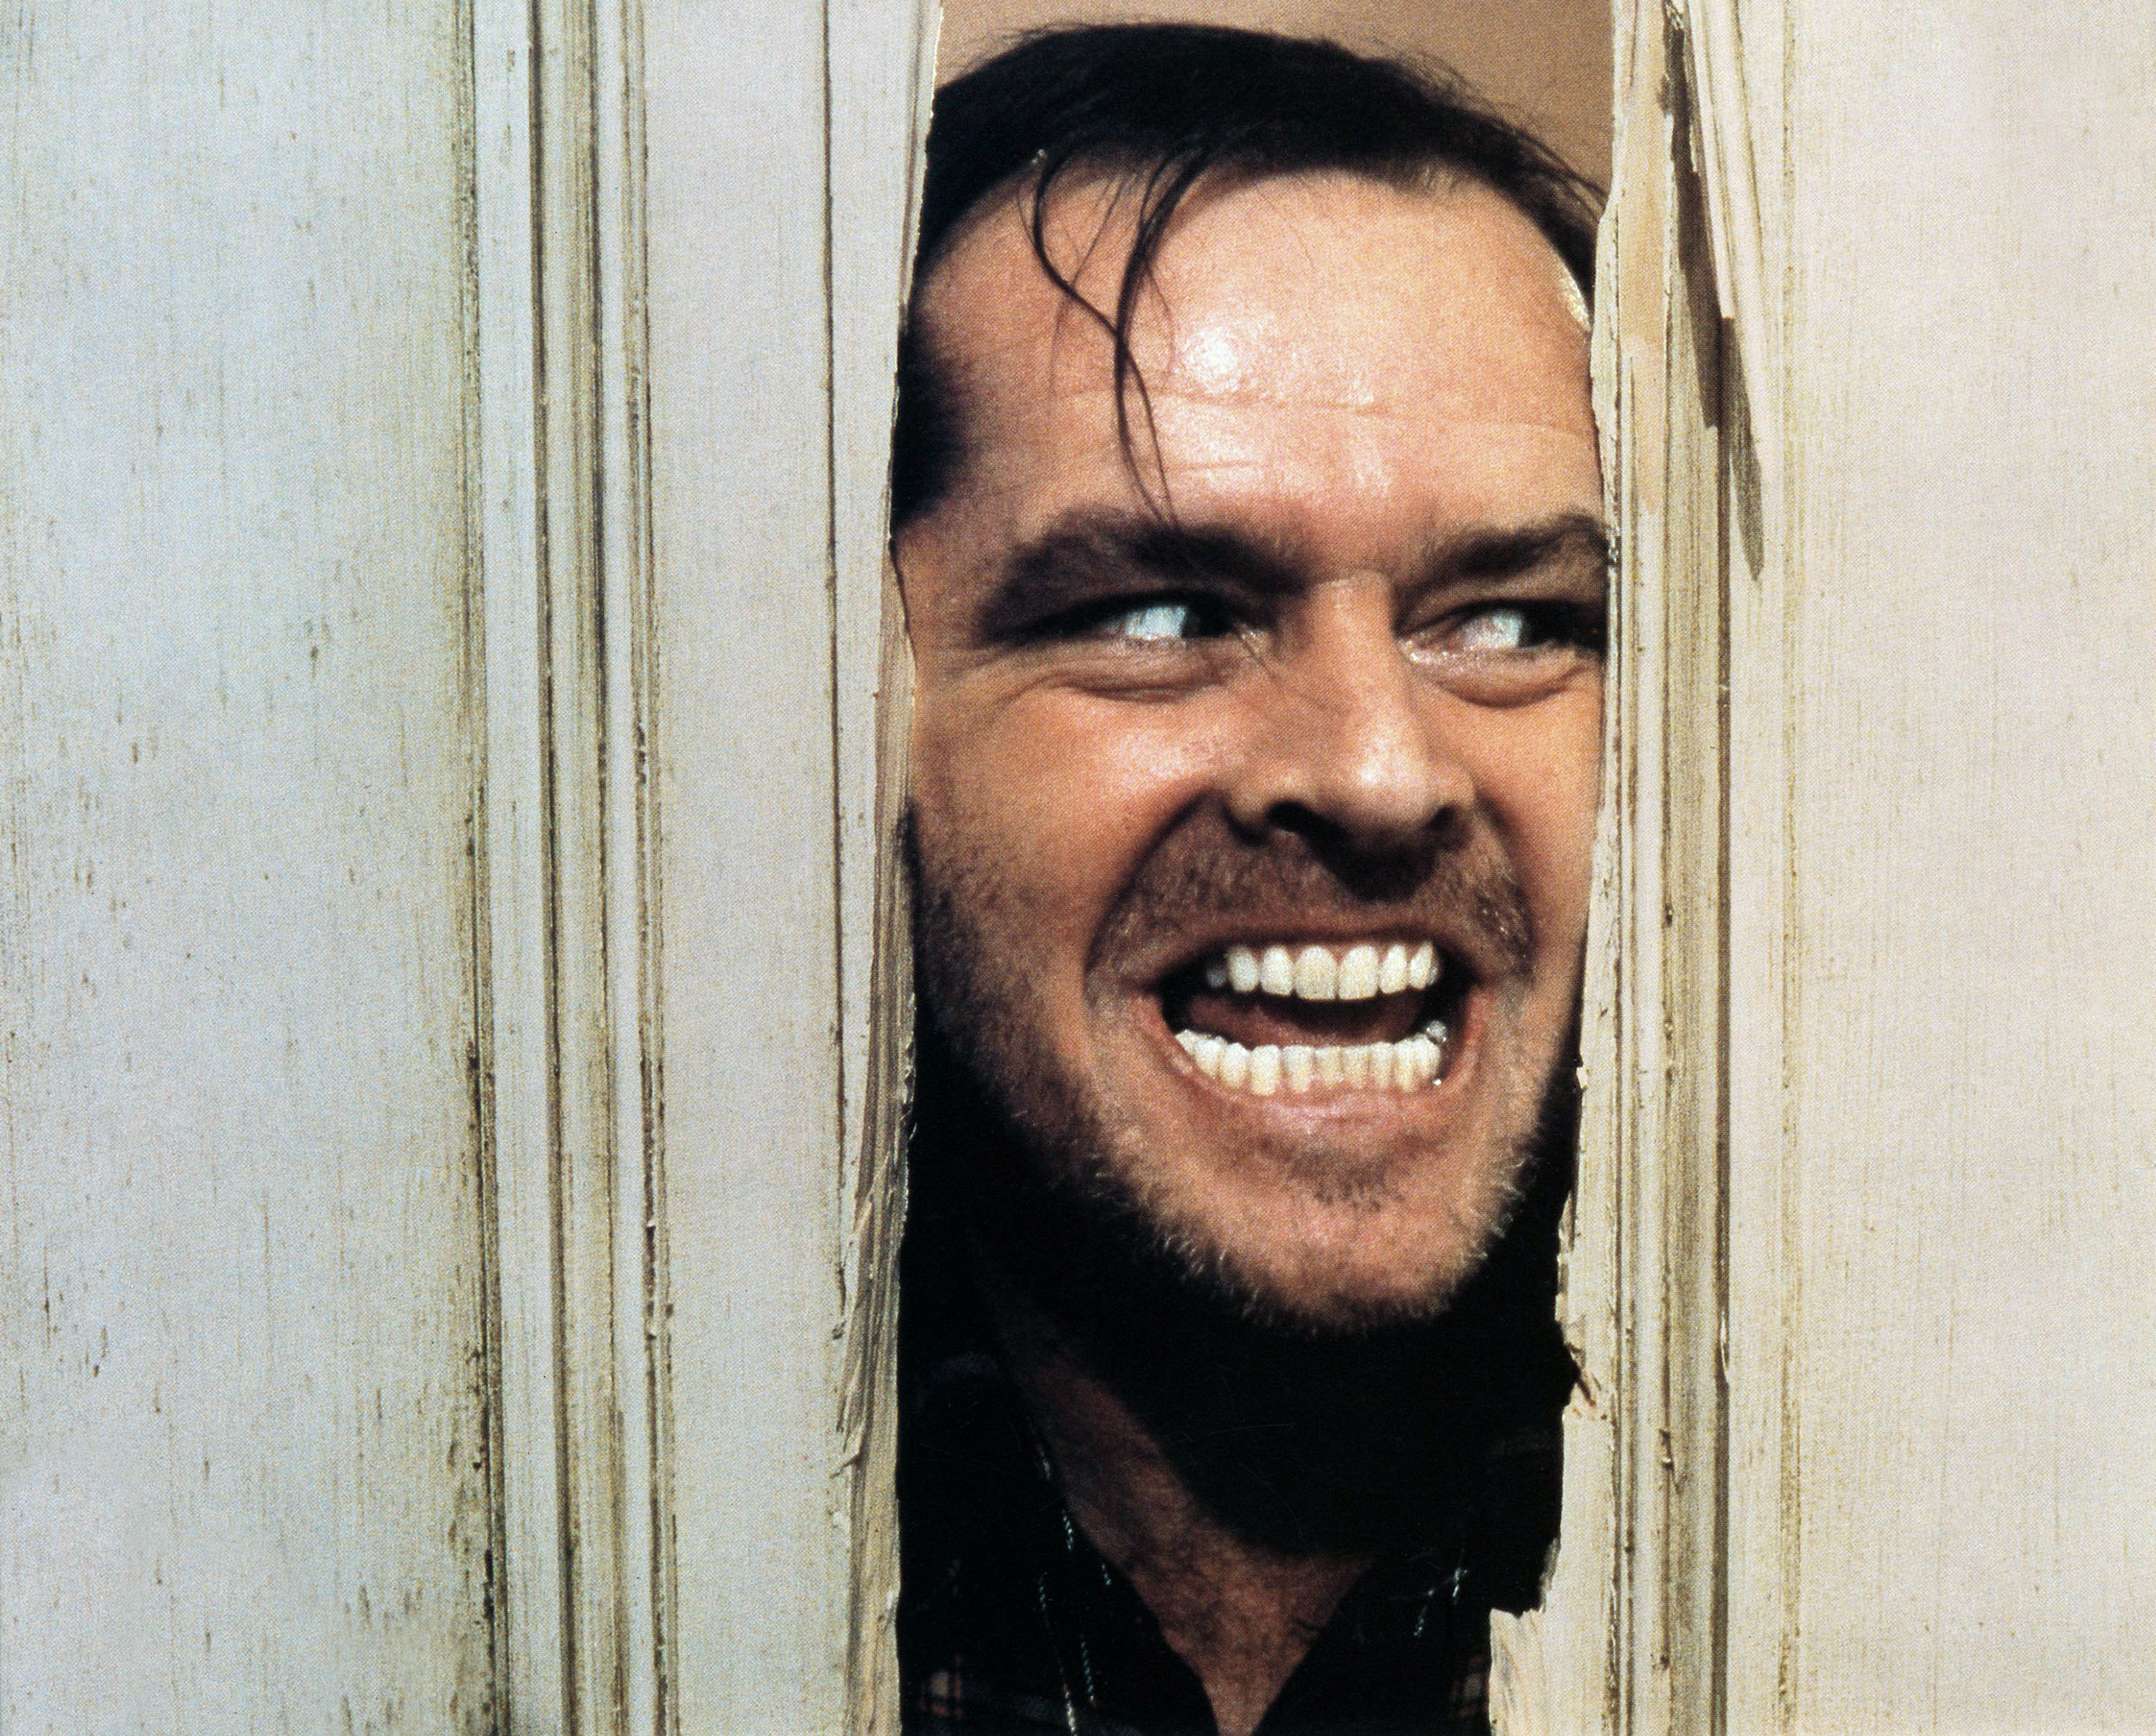 Jack Nicholson peers through a broken door with a manic expression, reenacting a famous scene from &quot;The Shining.&quot;